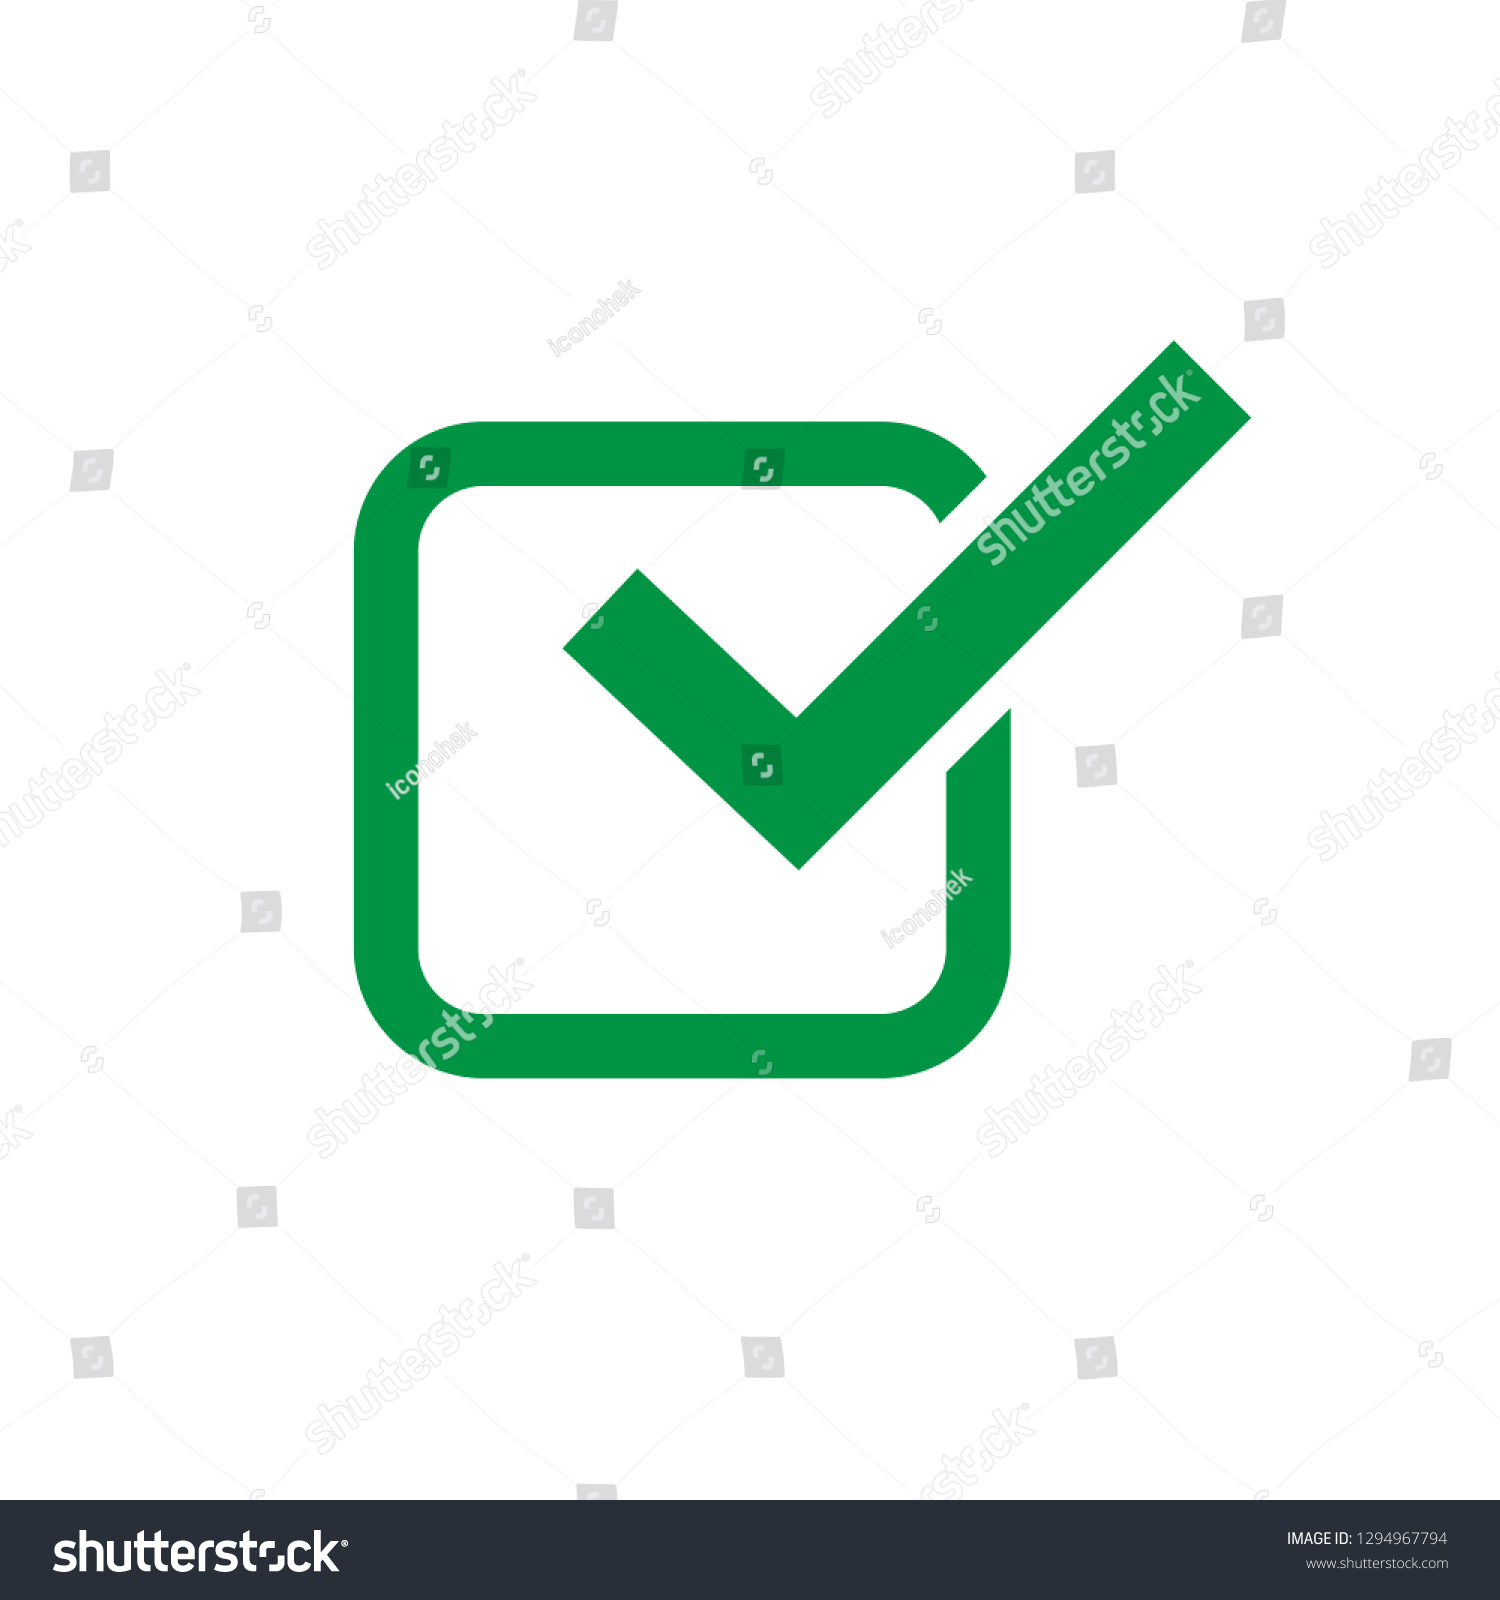 check mark icon yes symbol logo stock vector royalty free 1294967794 https www shutterstock com image vector check mark icon yes symbol logo 1294967794